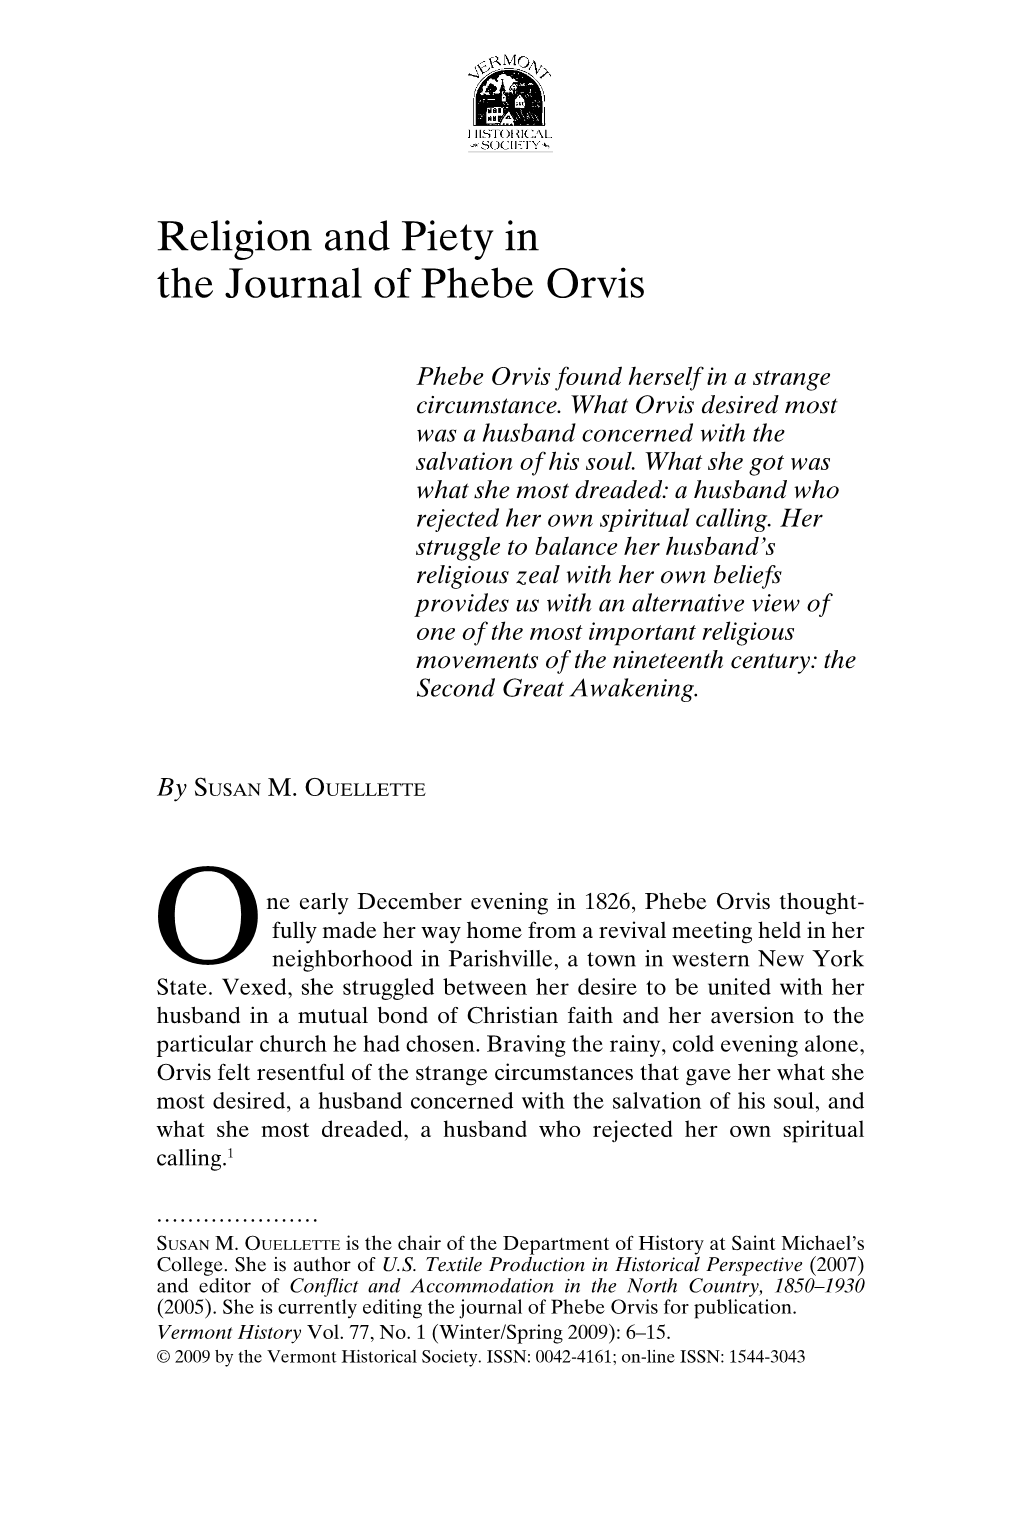 Religion and Piety in the Journal of Phebe Orvis